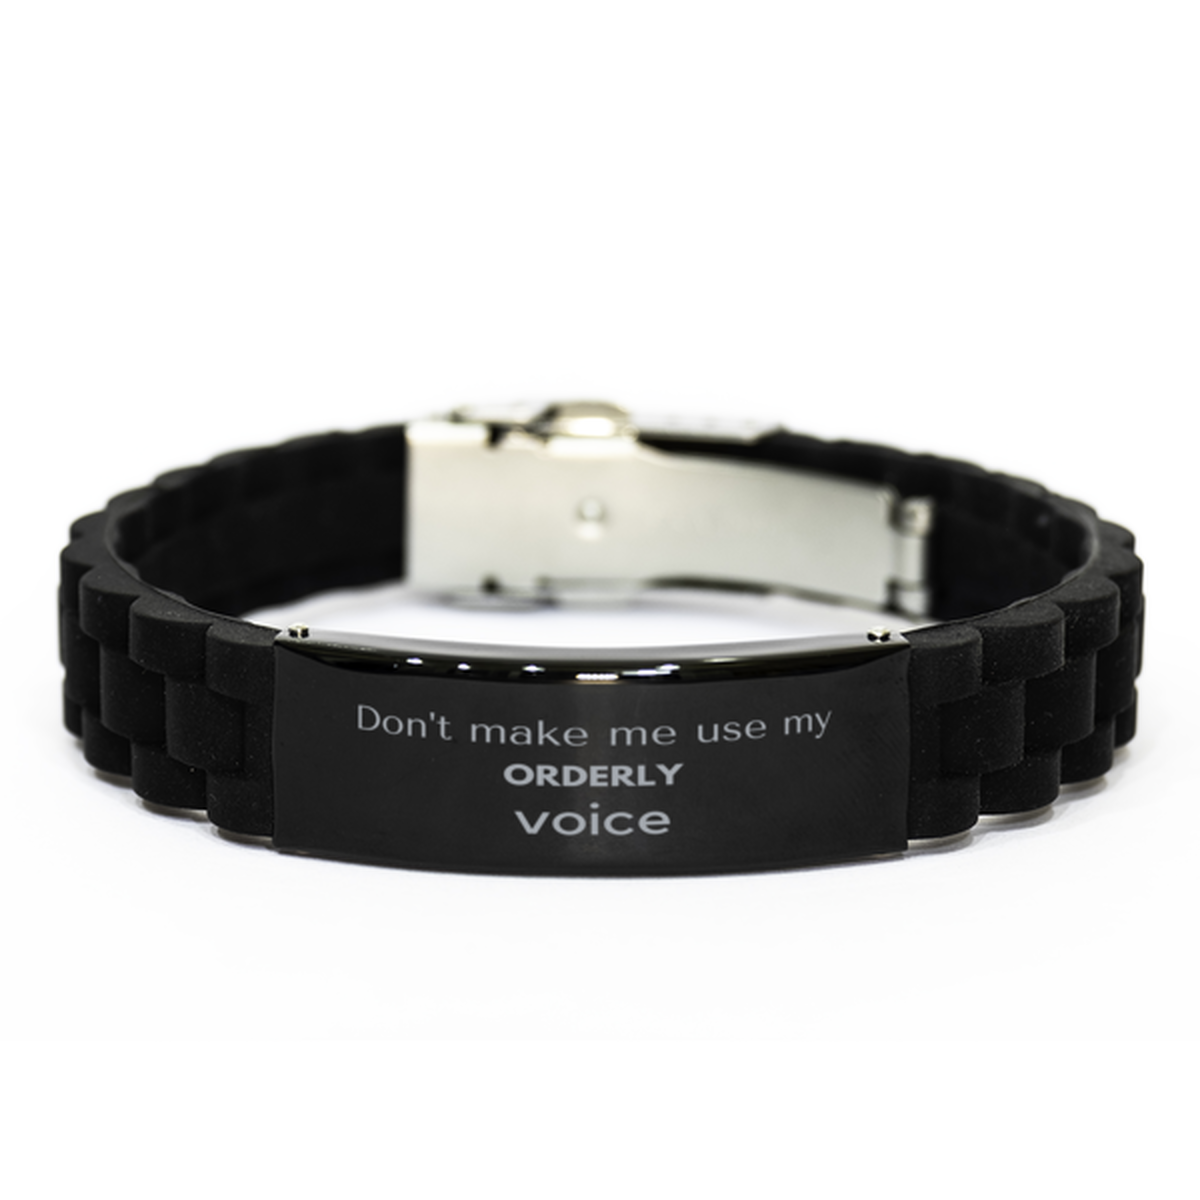 Don't make me use my Orderly voice, Sarcasm Orderly Gifts, Christmas Orderly Black Glidelock Clasp Bracelet Birthday Unique Gifts For Orderly Coworkers, Men, Women, Colleague, Friends